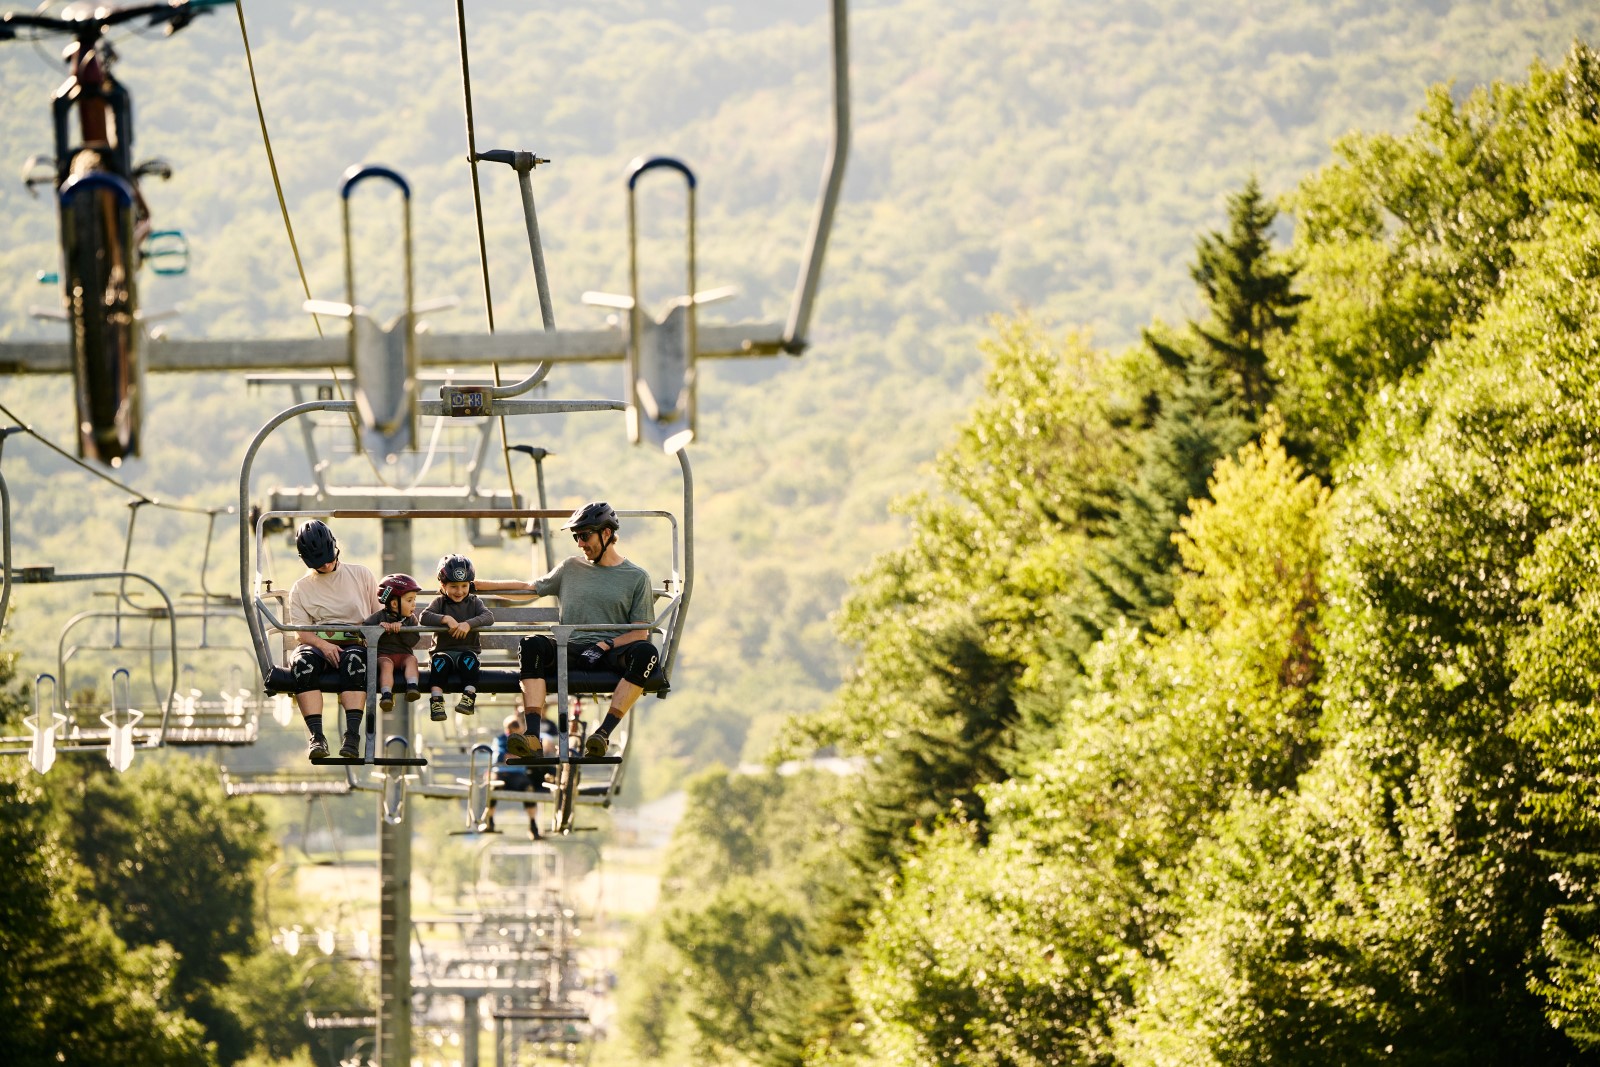 A Family Rides The Vista Lift in Summer